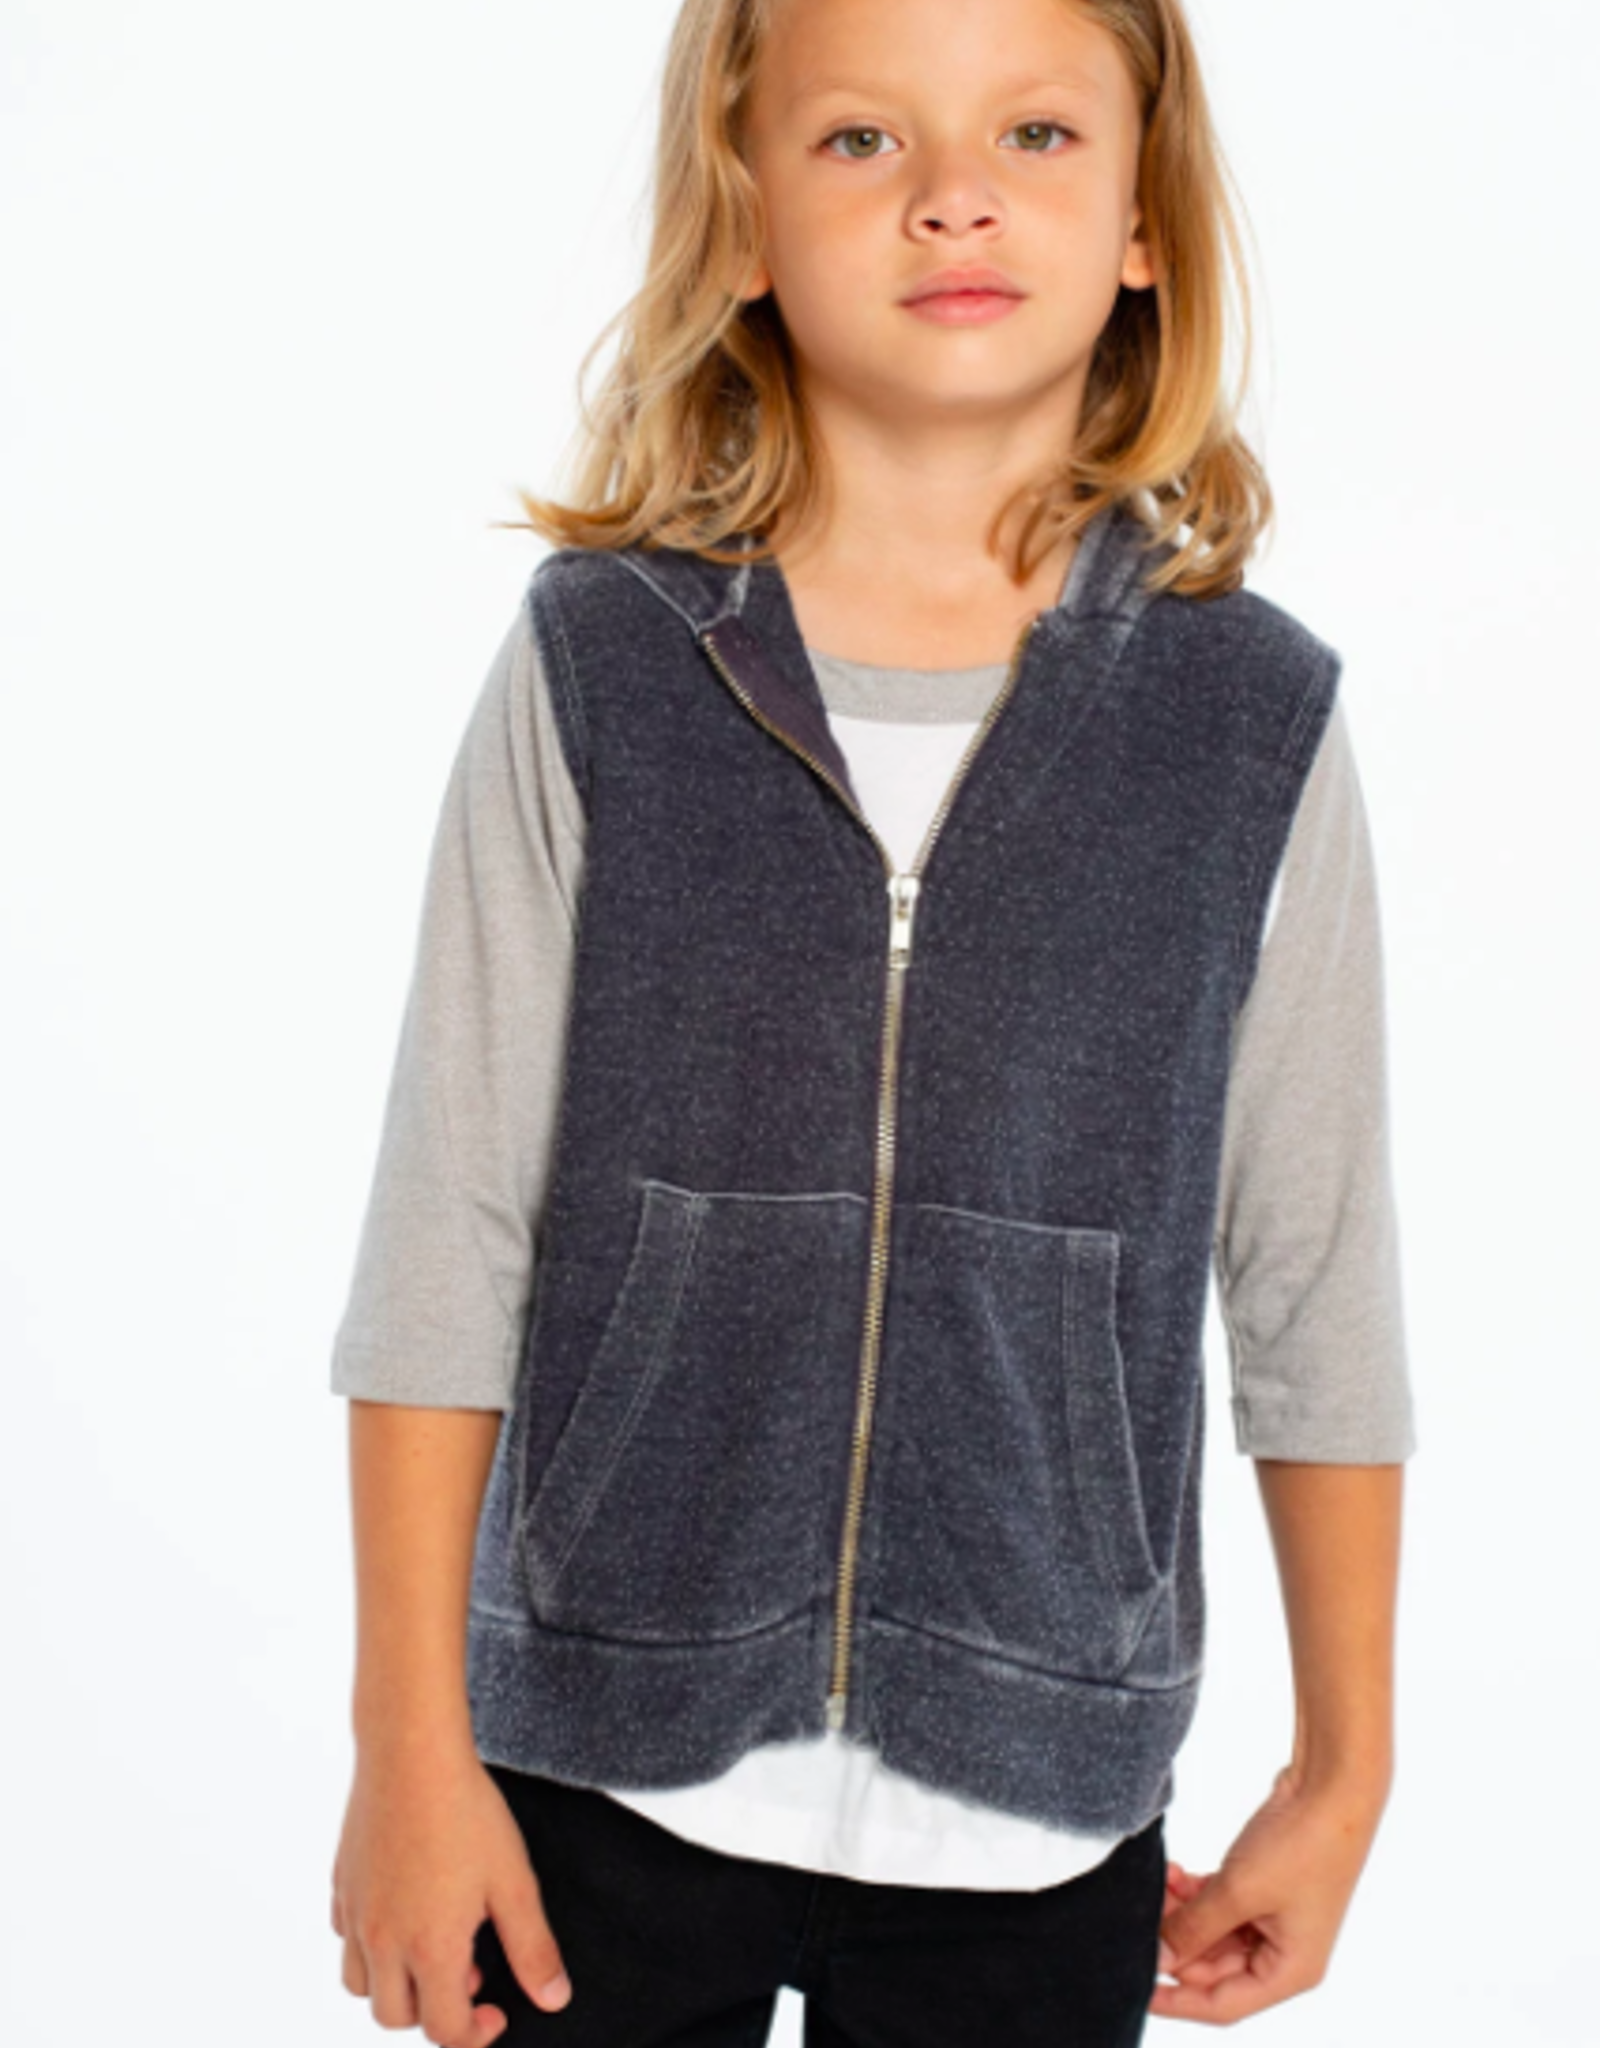 Chaser Cozy Knit Sleeveless Zip Up Hoodie